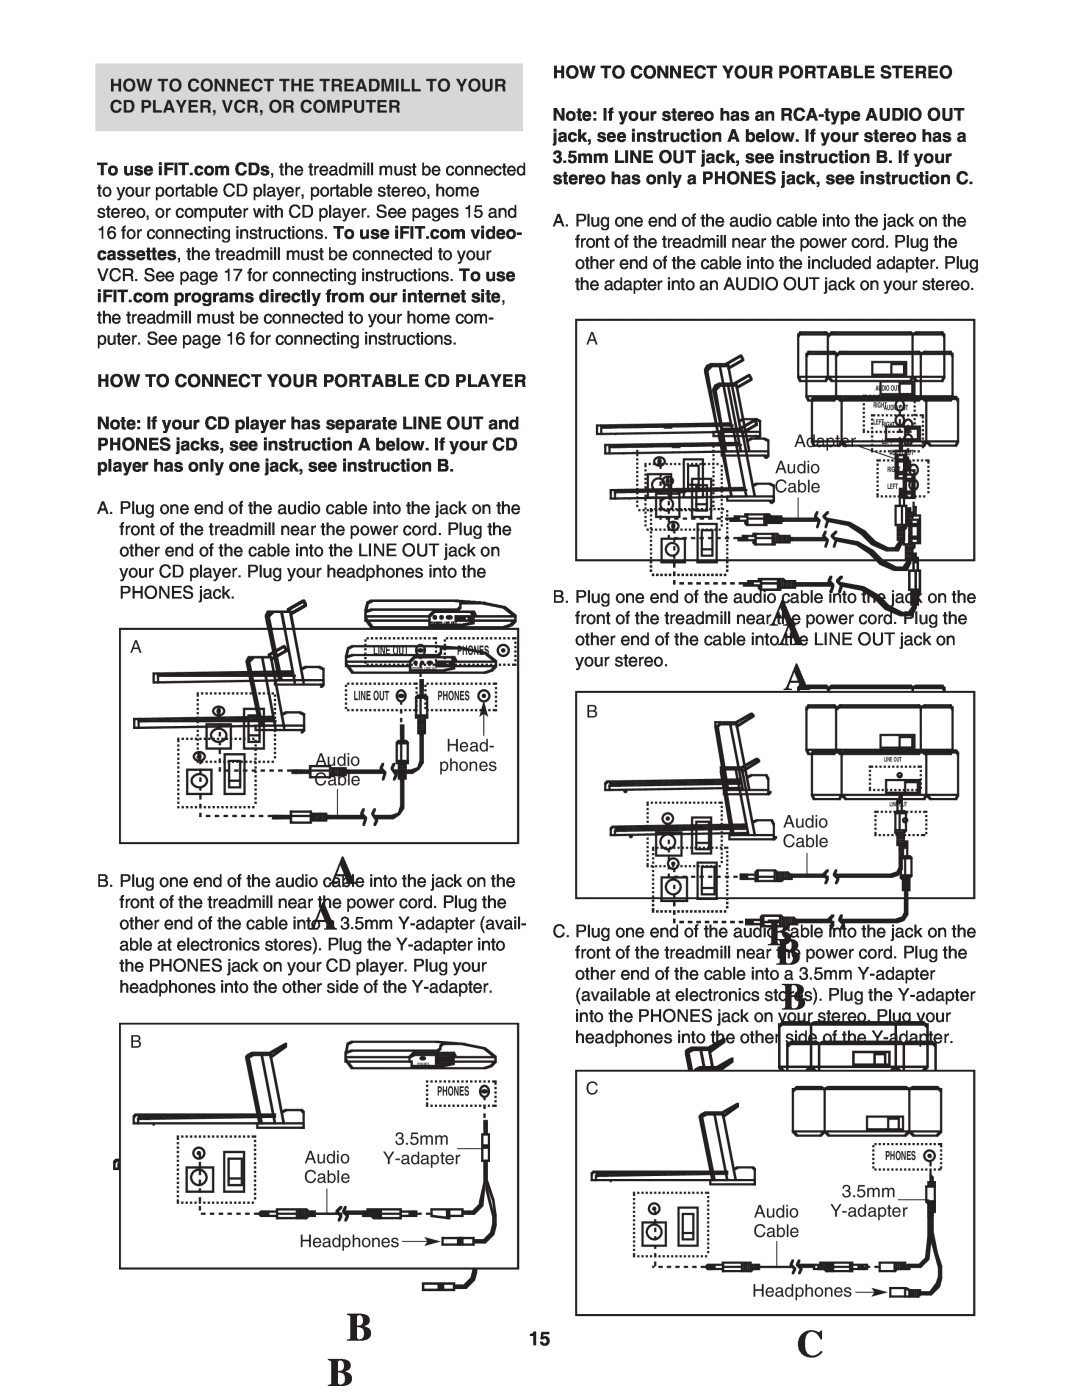 ProForm DTL4495C.0 user manual How To Connect Your Portable Stereo 